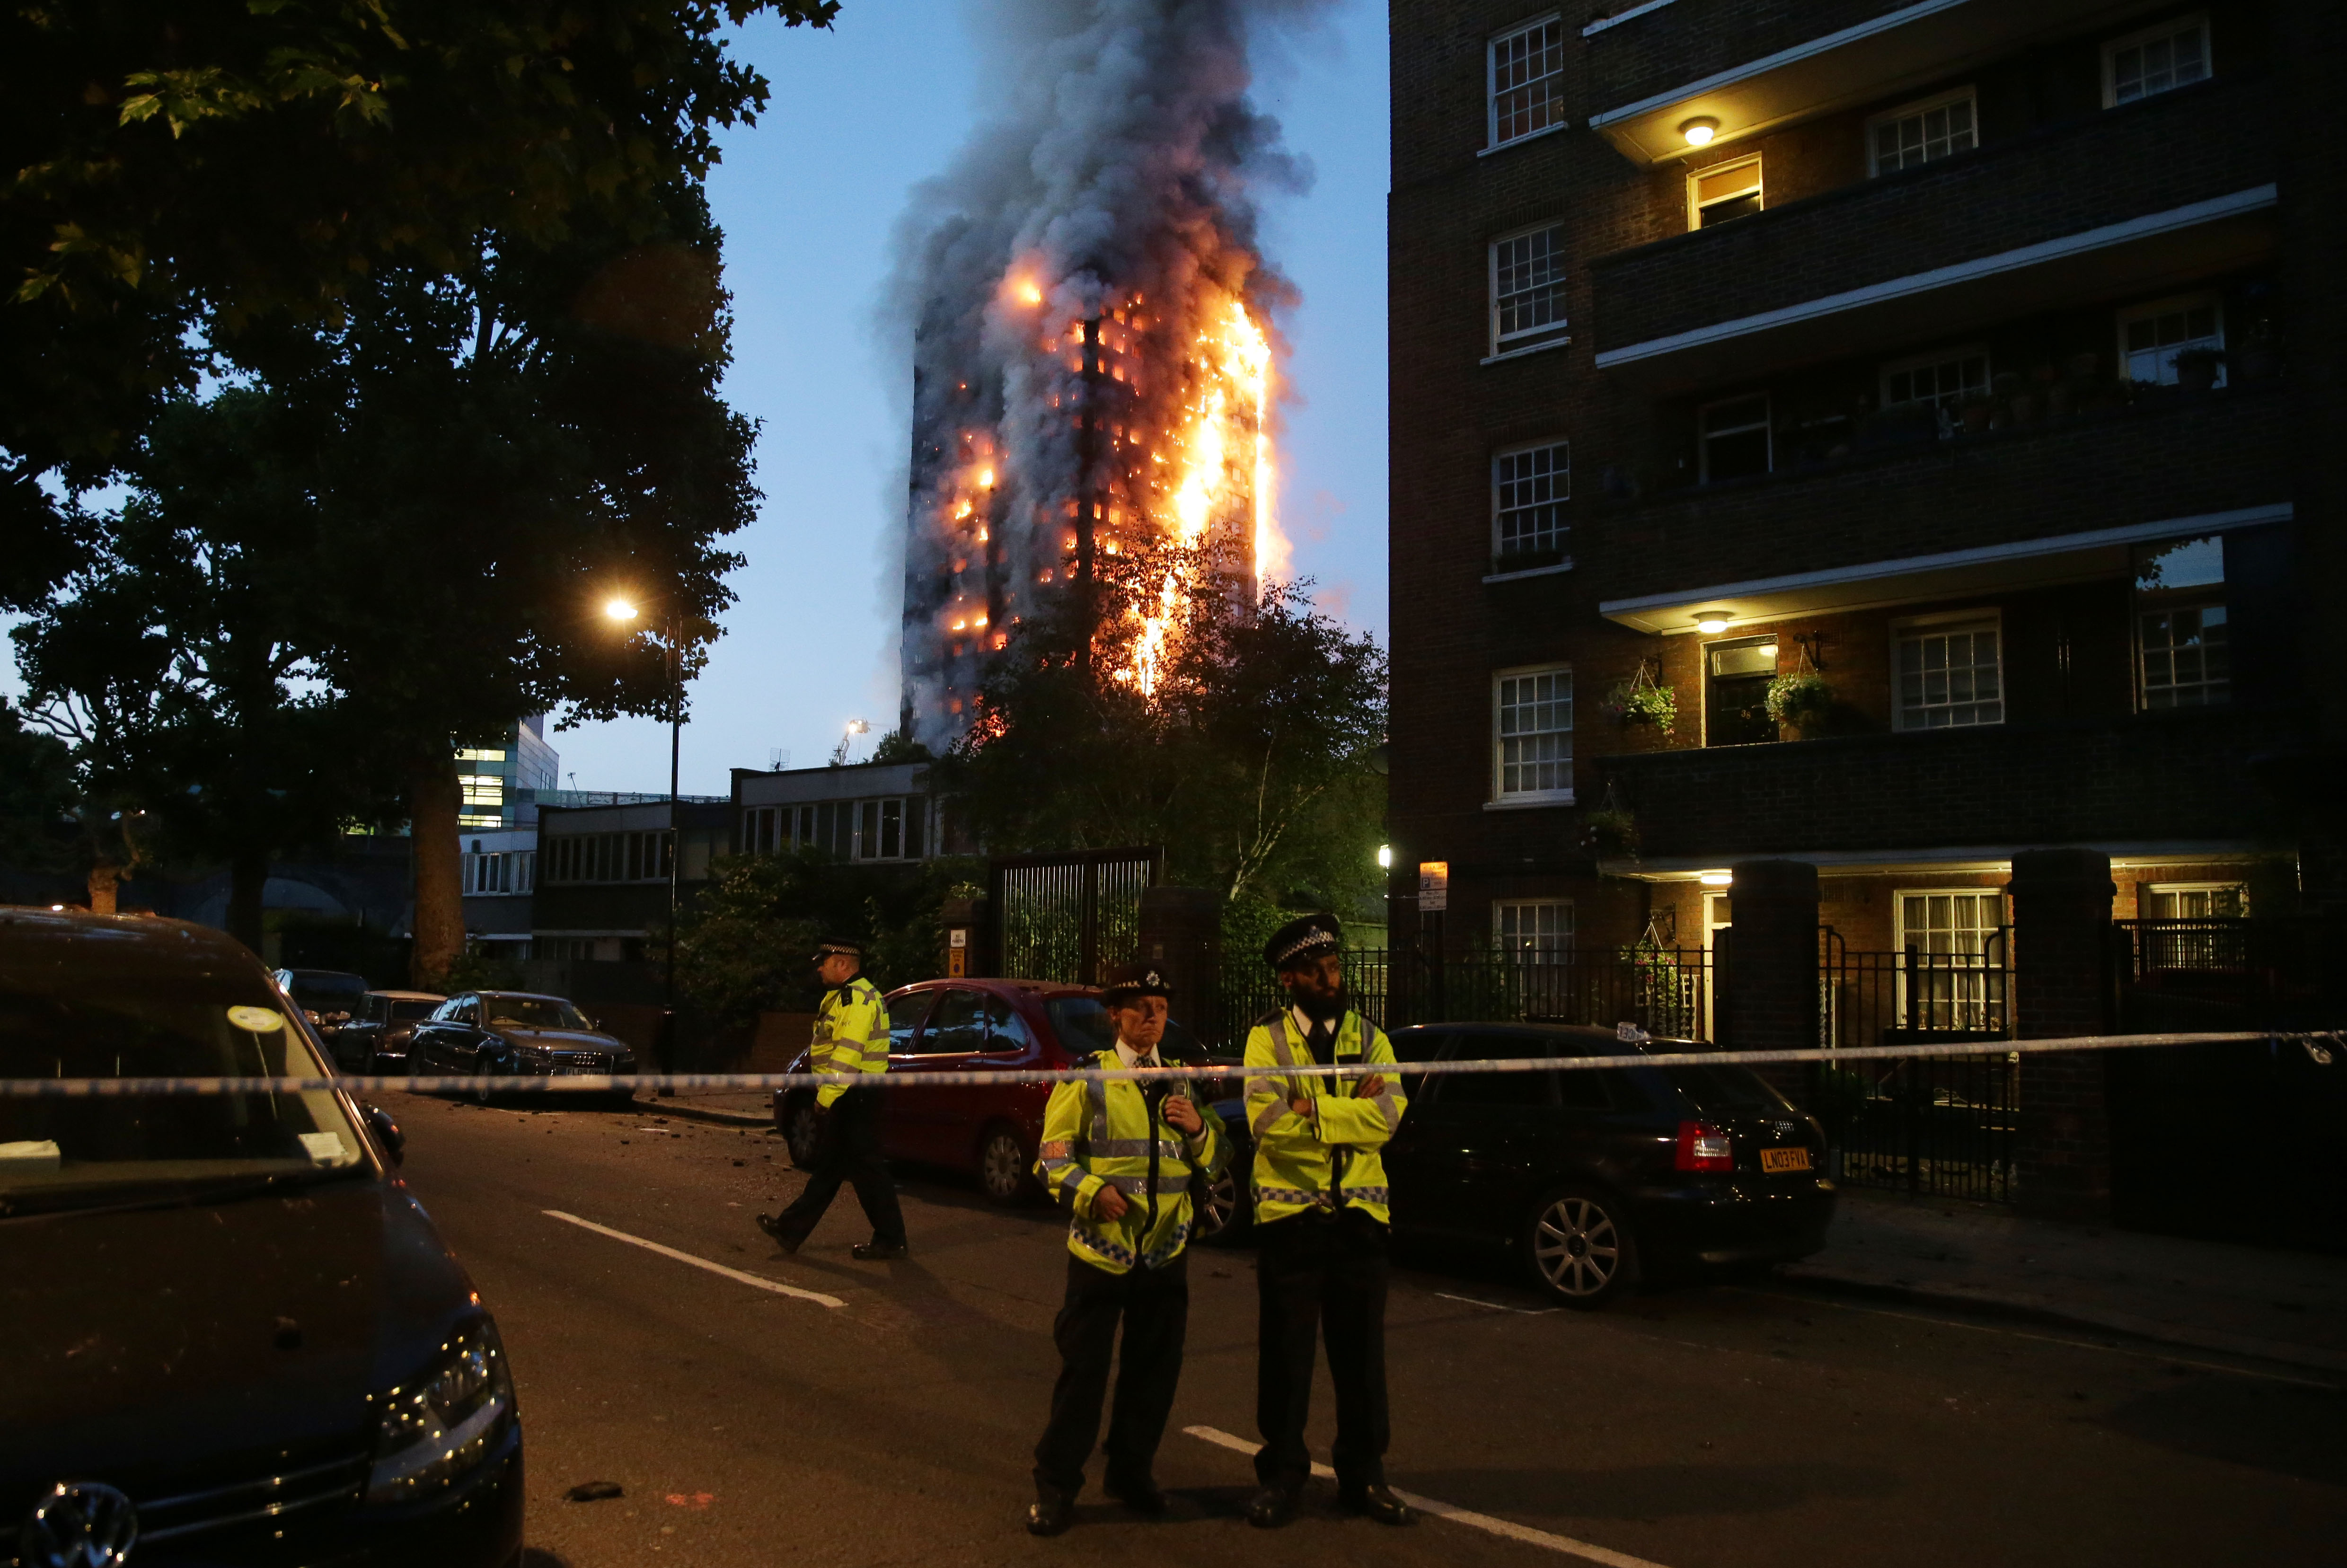 Police man a security cordon as a huge fire engulfs the Grenfell Tower early June 14, 2017 in west London. .The massive fire ripped through the 27-storey apartment block in west London in the early hours of Wednesday, trapping residents inside as 200 firefighters battled the blaze. Police and fire services attempted to evacuate the concrete